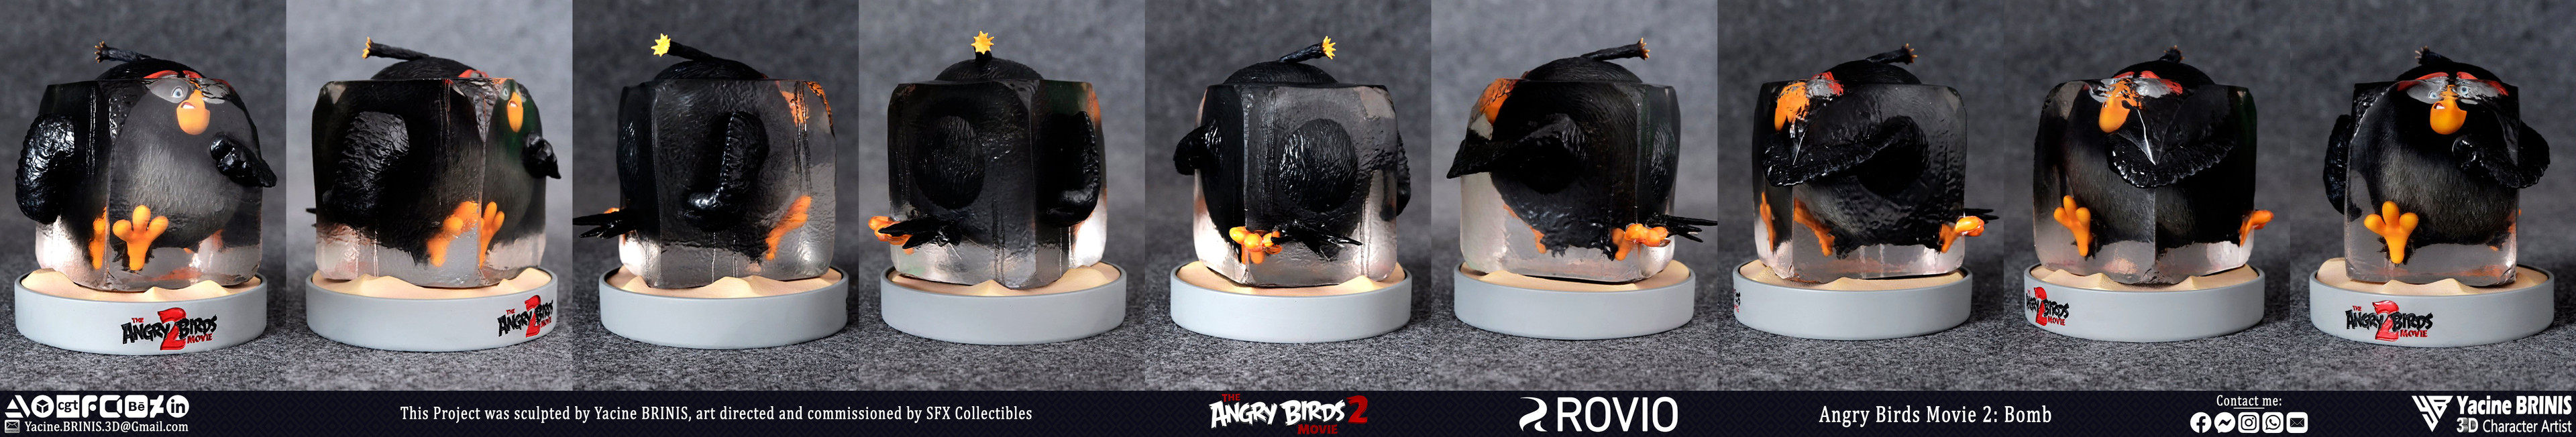 Angry Birds Movie 2 Rovio Entertainment Sculpted by Yacine BRINIS 011 Bomb Printed by SFX Collectibles